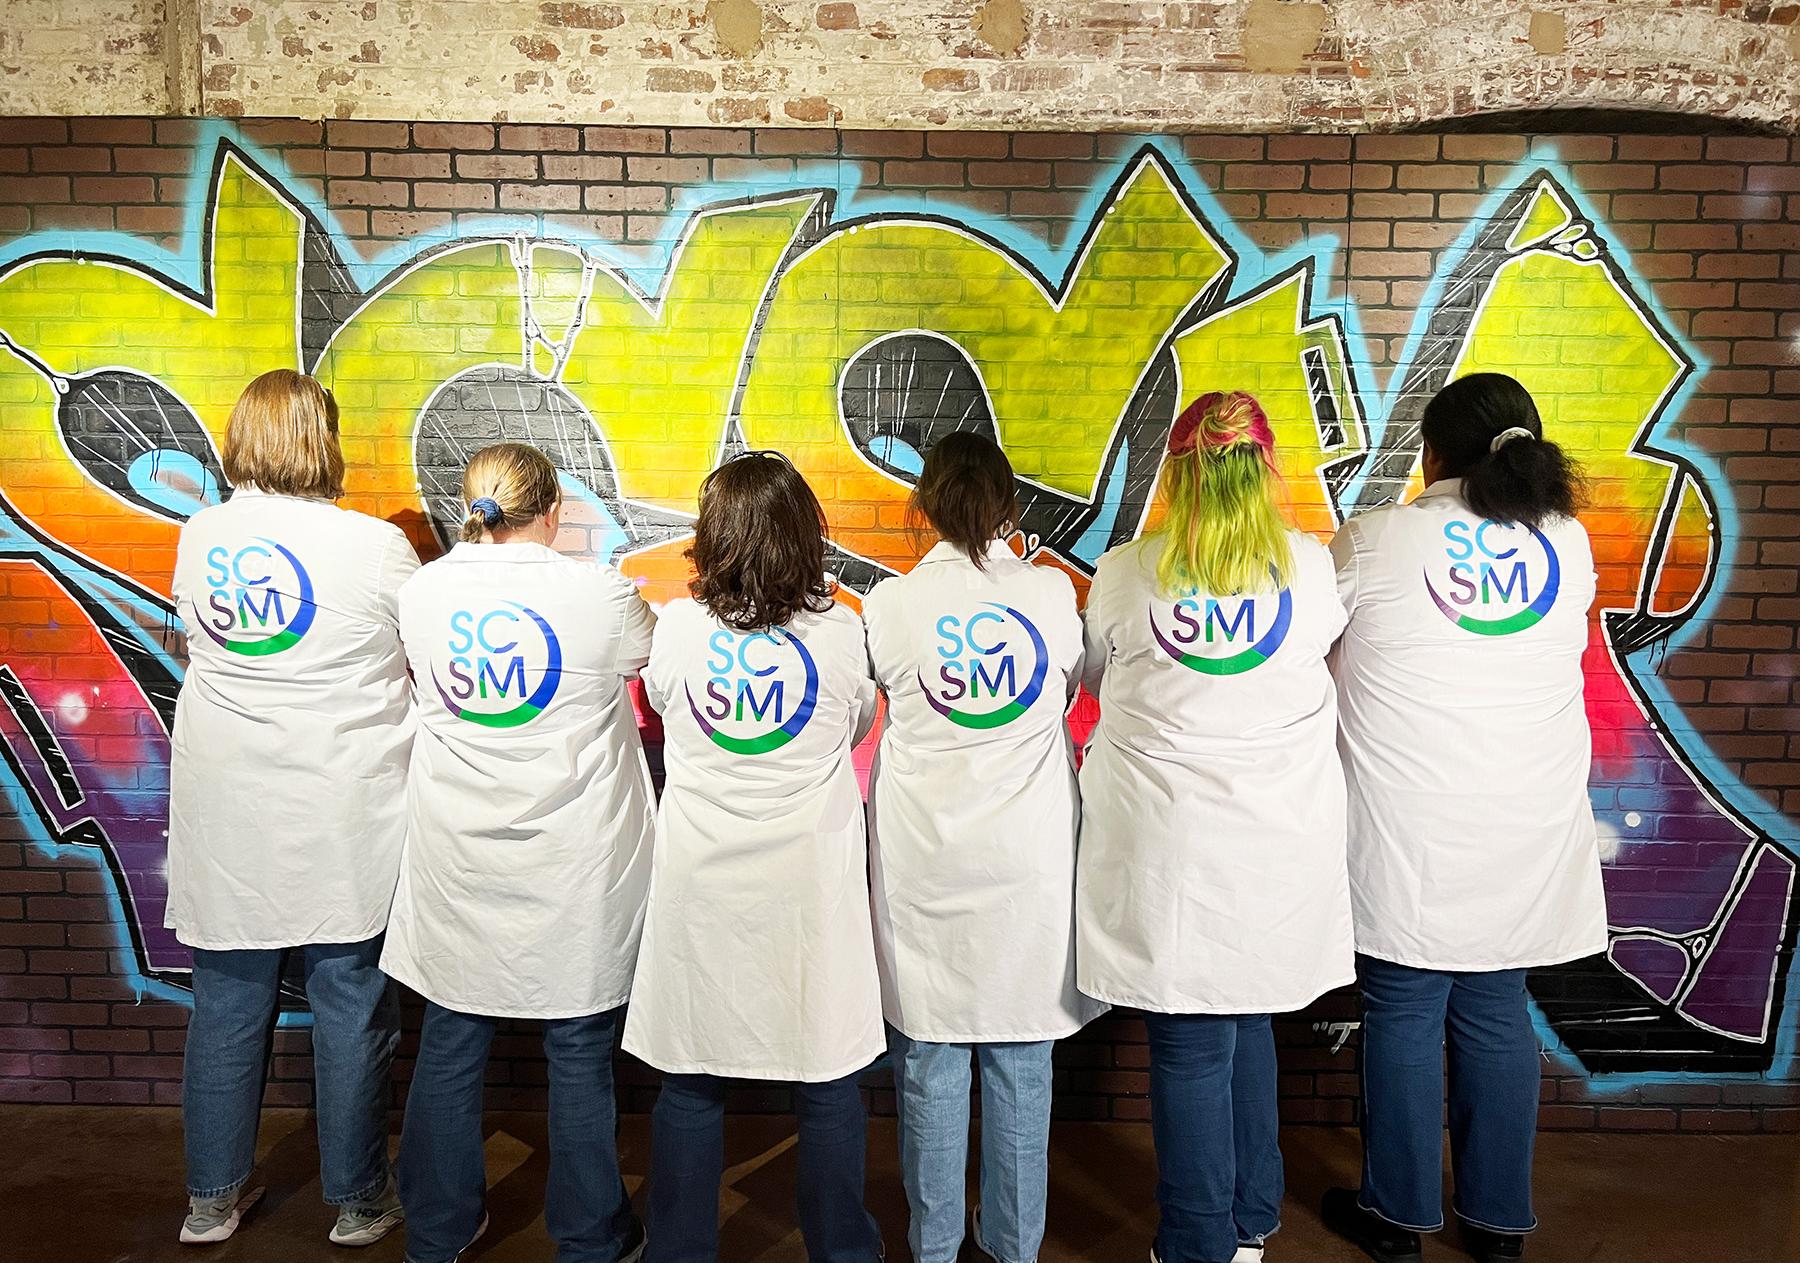 Group stand with backs to camera showing the SCSM logo on the backs of their lab coats